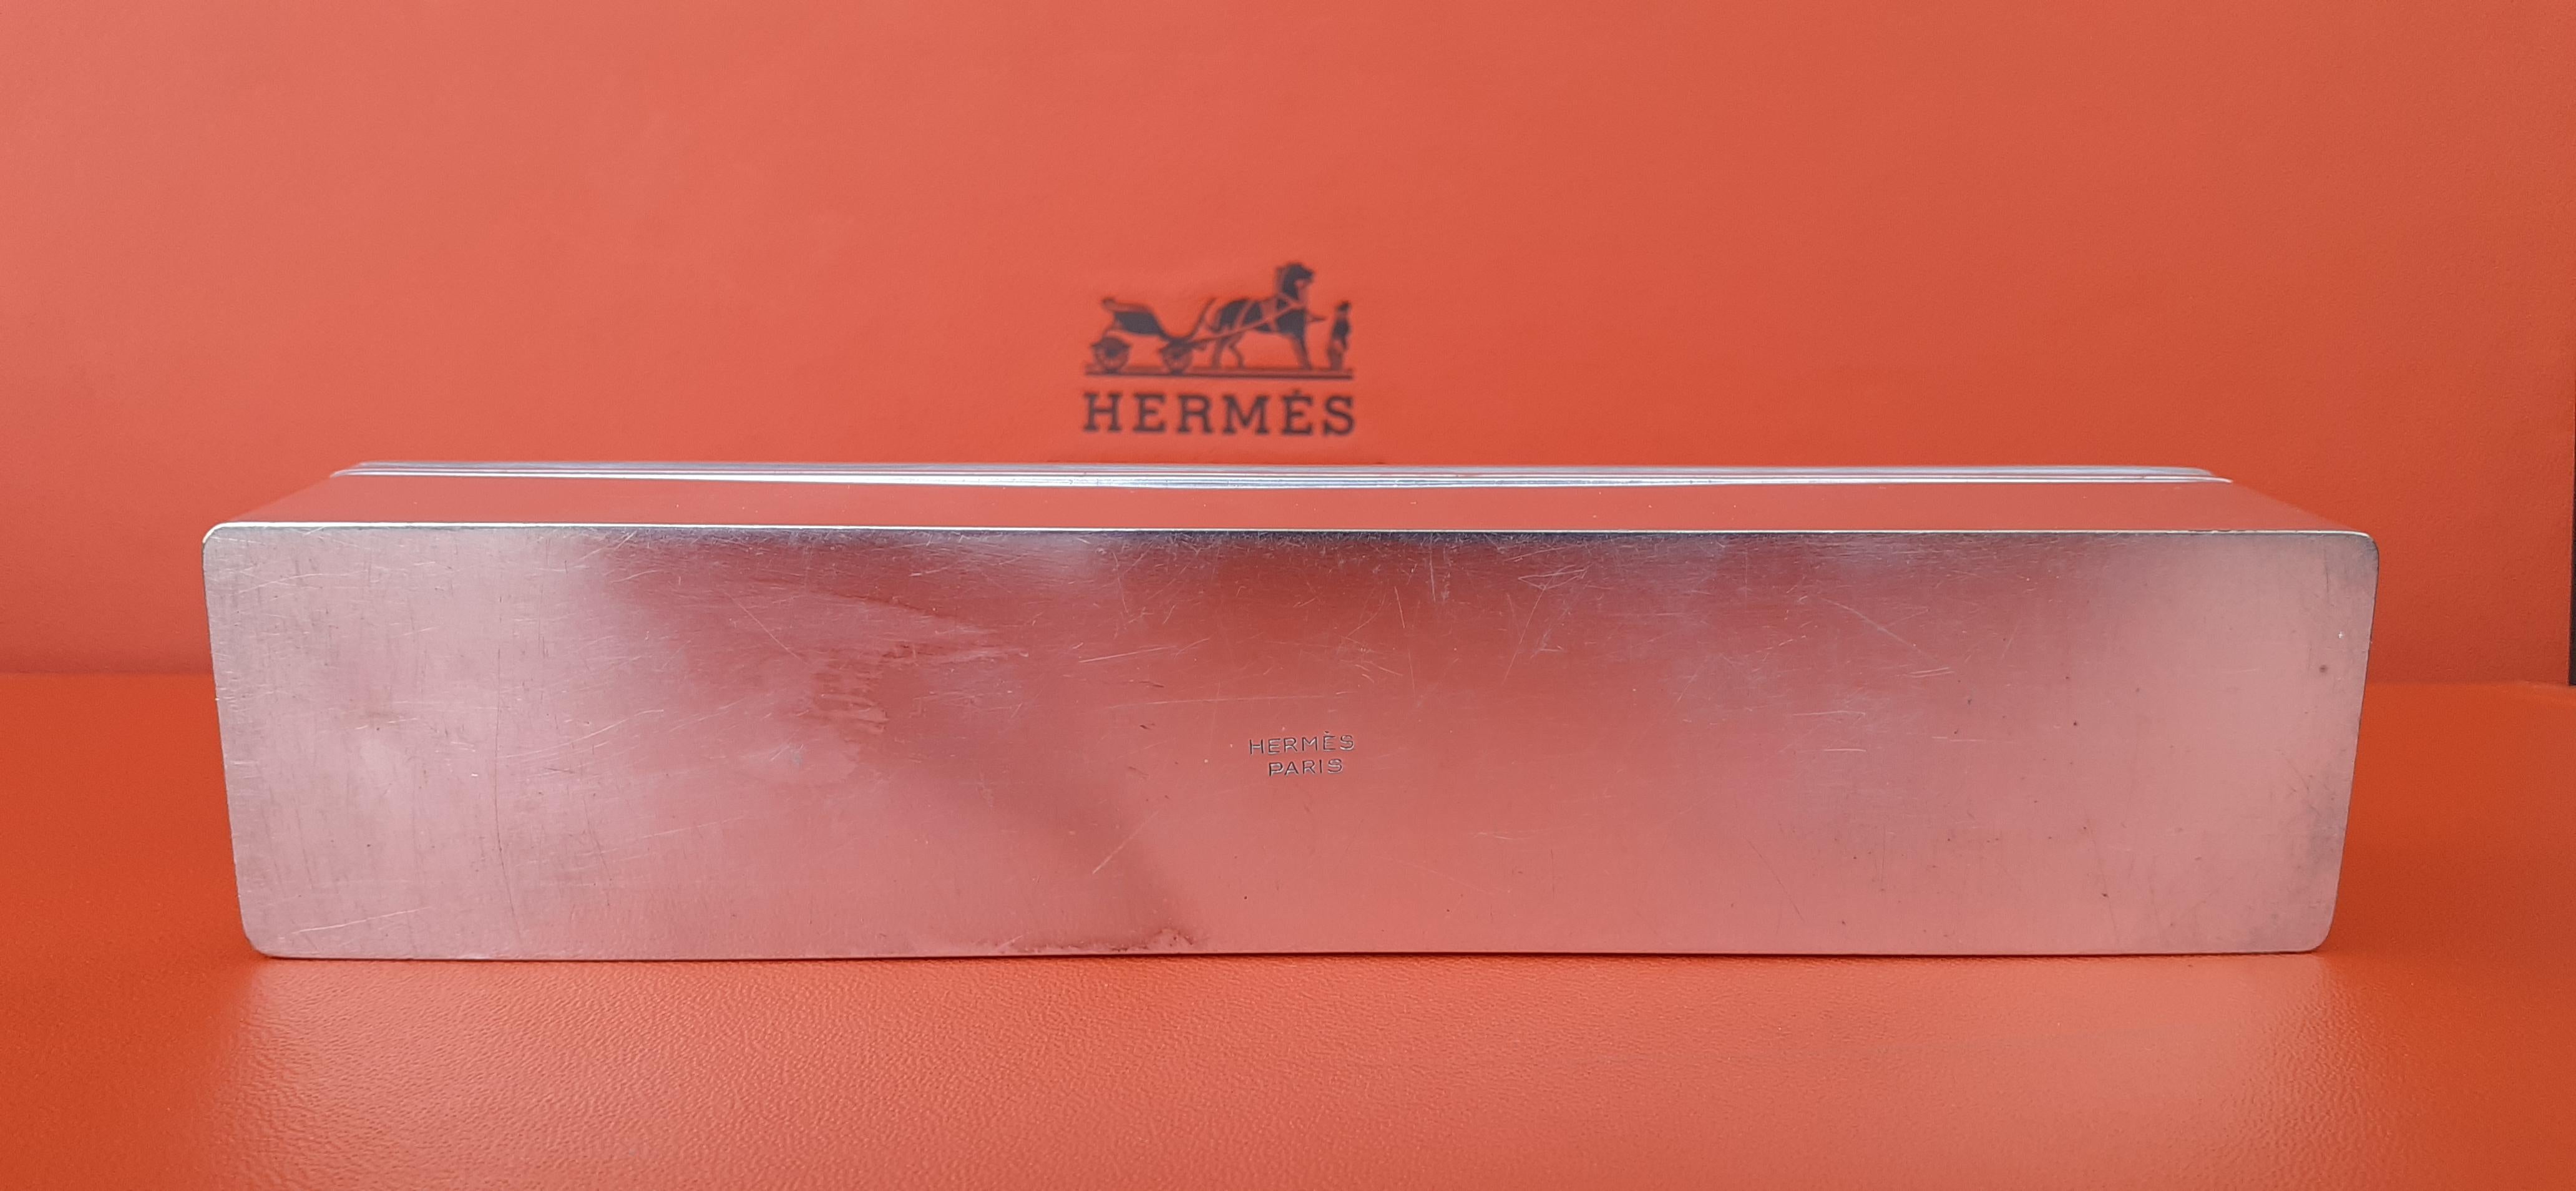 Exceptional Hermès Openwork Chiselled Silver Box Case RARE For Sale 4